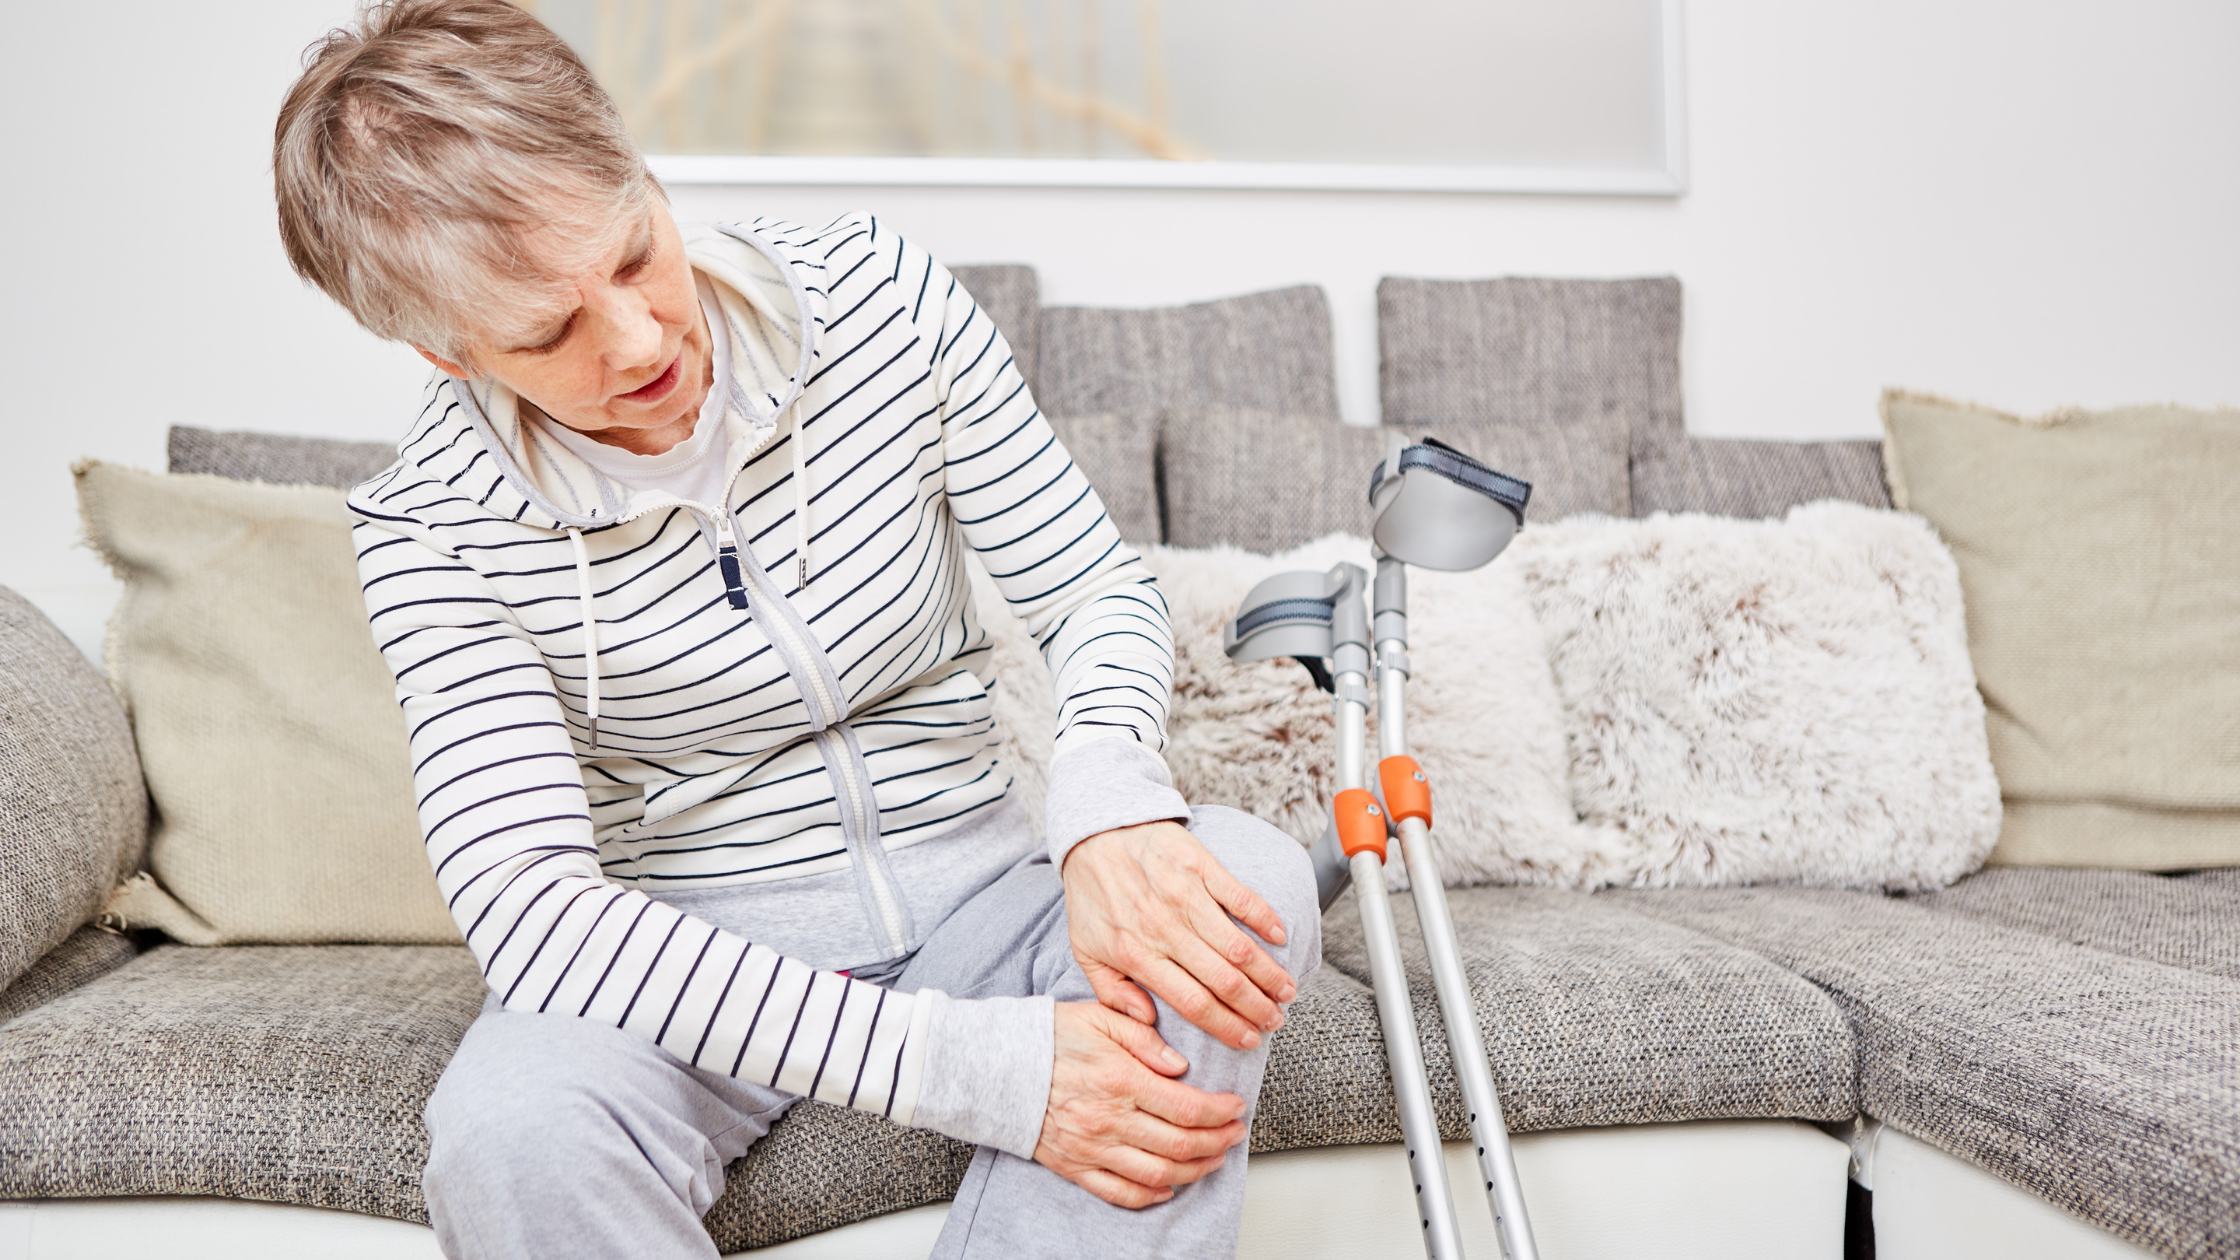 Common In-Home Injuries for Senior Citizens